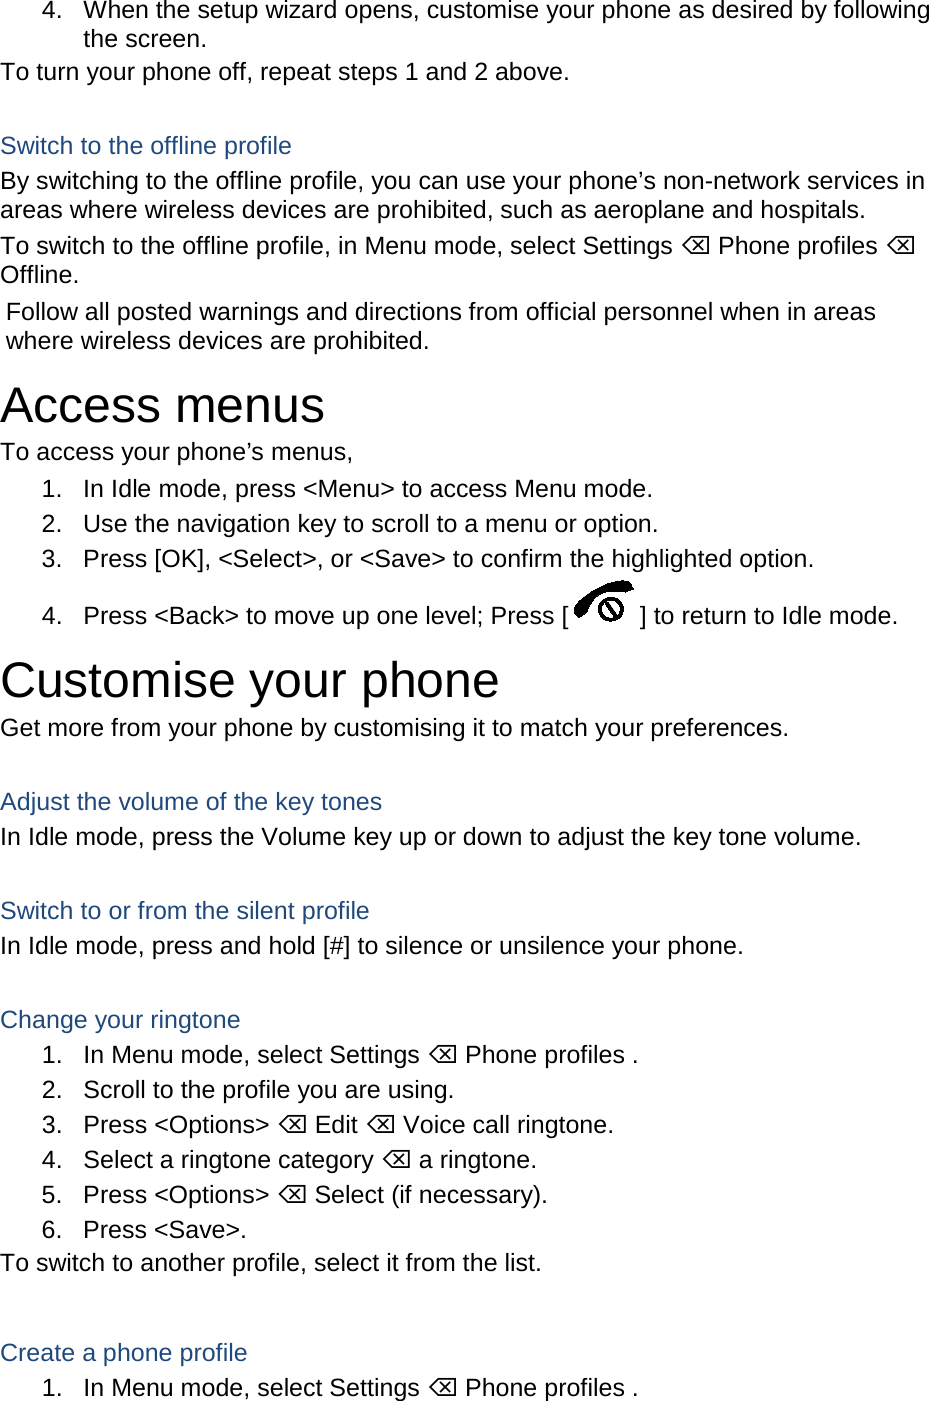 4. When the setup wizard opens, customise your phone as desired by following the screen. To turn your phone off, repeat steps 1 and 2 above.  Switch to the offline profile By switching to the offline profile, you can use your phone’s non-network services in areas where wireless devices are prohibited, such as aeroplane and hospitals. To switch to the offline profile, in Menu mode, select Settings  Phone profiles  Offline. Follow all posted warnings and directions from official personnel when in areas where wireless devices are prohibited. Access menus To access your phone’s menus, 1. In Idle mode, press &lt;Menu&gt; to access Menu mode. 2. Use the navigation key to scroll to a menu or option. 3. Press [OK], &lt;Select&gt;, or &lt;Save&gt; to confirm the highlighted option. 4. Press &lt;Back&gt; to move up one level; Press [ ] to return to Idle mode. Customise your phone Get more from your phone by customising it to match your preferences.  Adjust the volume of the key tones In Idle mode, press the Volume key up or down to adjust the key tone volume.  Switch to or from the silent profile In Idle mode, press and hold [#] to silence or unsilence your phone.  Change your ringtone 1. In Menu mode, select Settings  Phone profiles . 2. Scroll to the profile you are using. 3. Press &lt;Options&gt;  Edit  Voice call ringtone. 4. Select a ringtone category  a ringtone. 5. Press &lt;Options&gt;  Select (if necessary). 6. Press &lt;Save&gt;. To switch to another profile, select it from the list.  Create a phone profile 1. In Menu mode, select Settings  Phone profiles . 